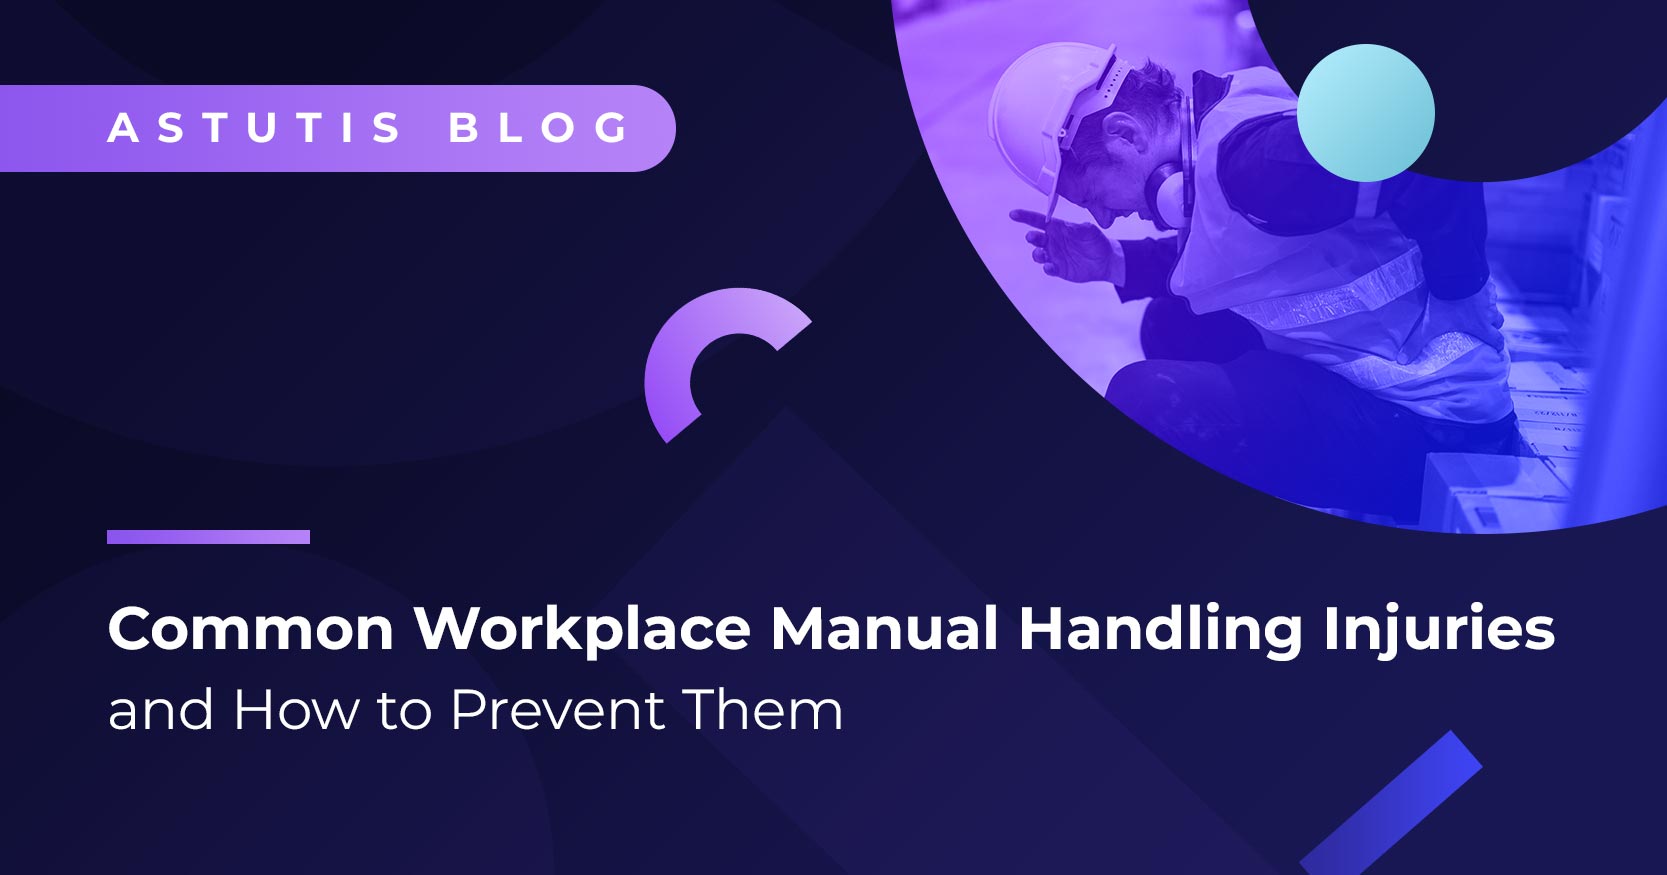 Common Workplace Manual Handling Injuries and How to Prevent Them Image